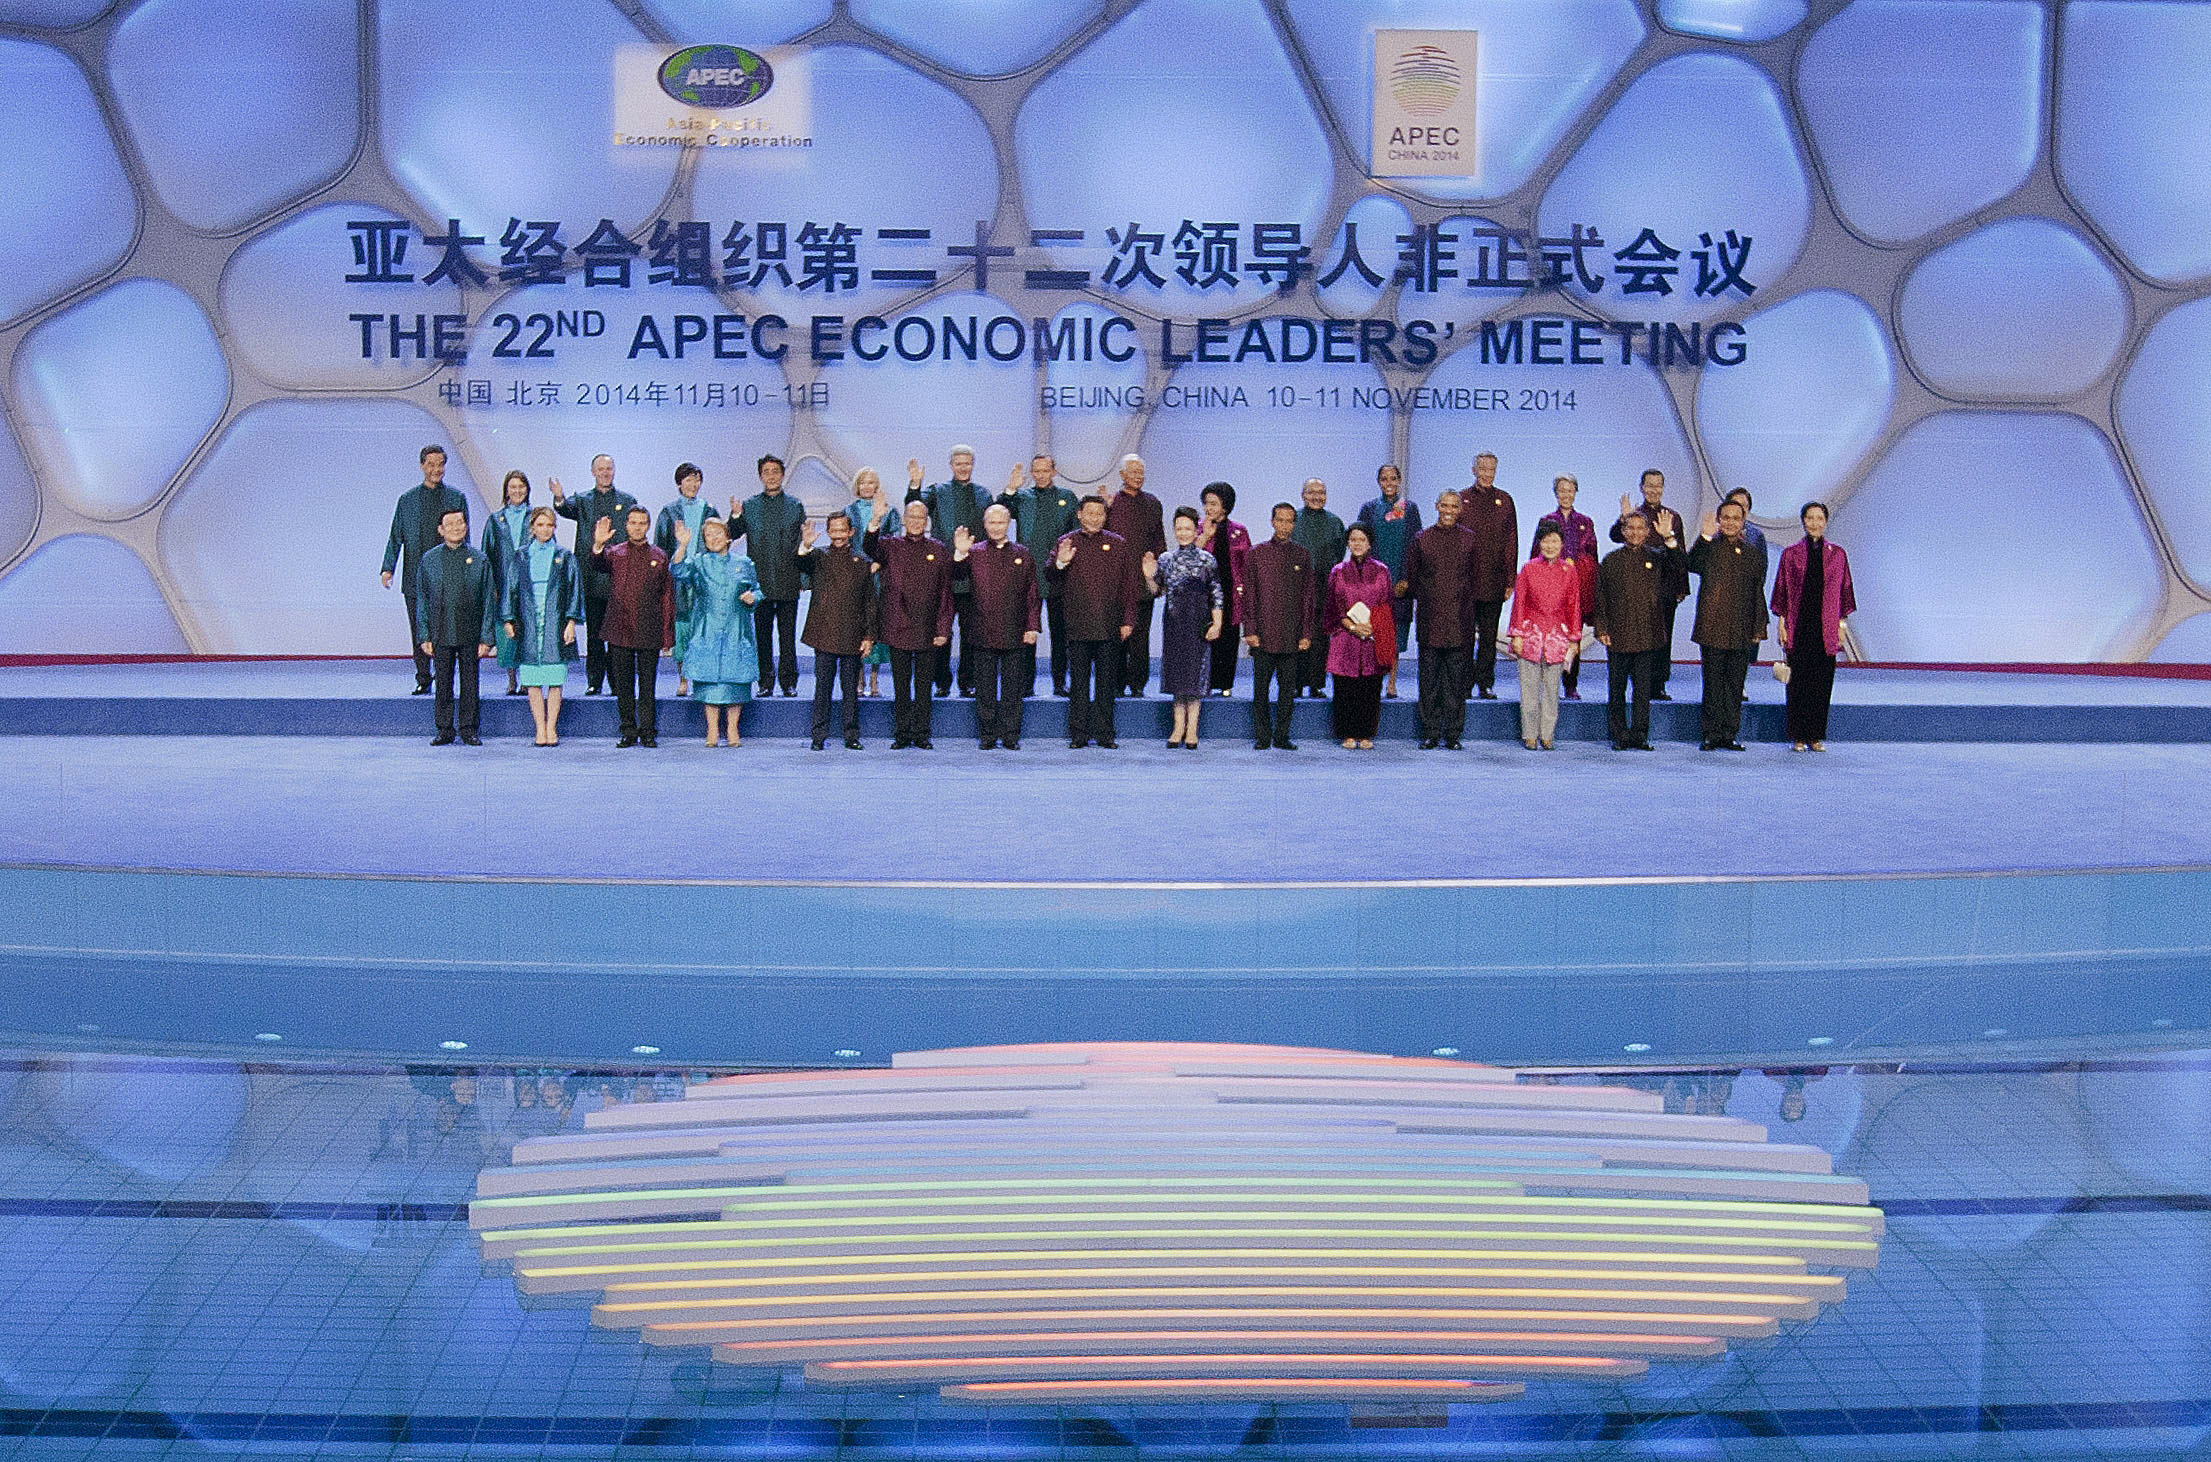 PHOTO: Chinese President Xi Jinping, center, U.S. President Barack Obama, and other world leaders during the Aisa-Pacific Economic Cooperation (APEC) Summit family photo, Nov. 10, 2014 in Beijing.